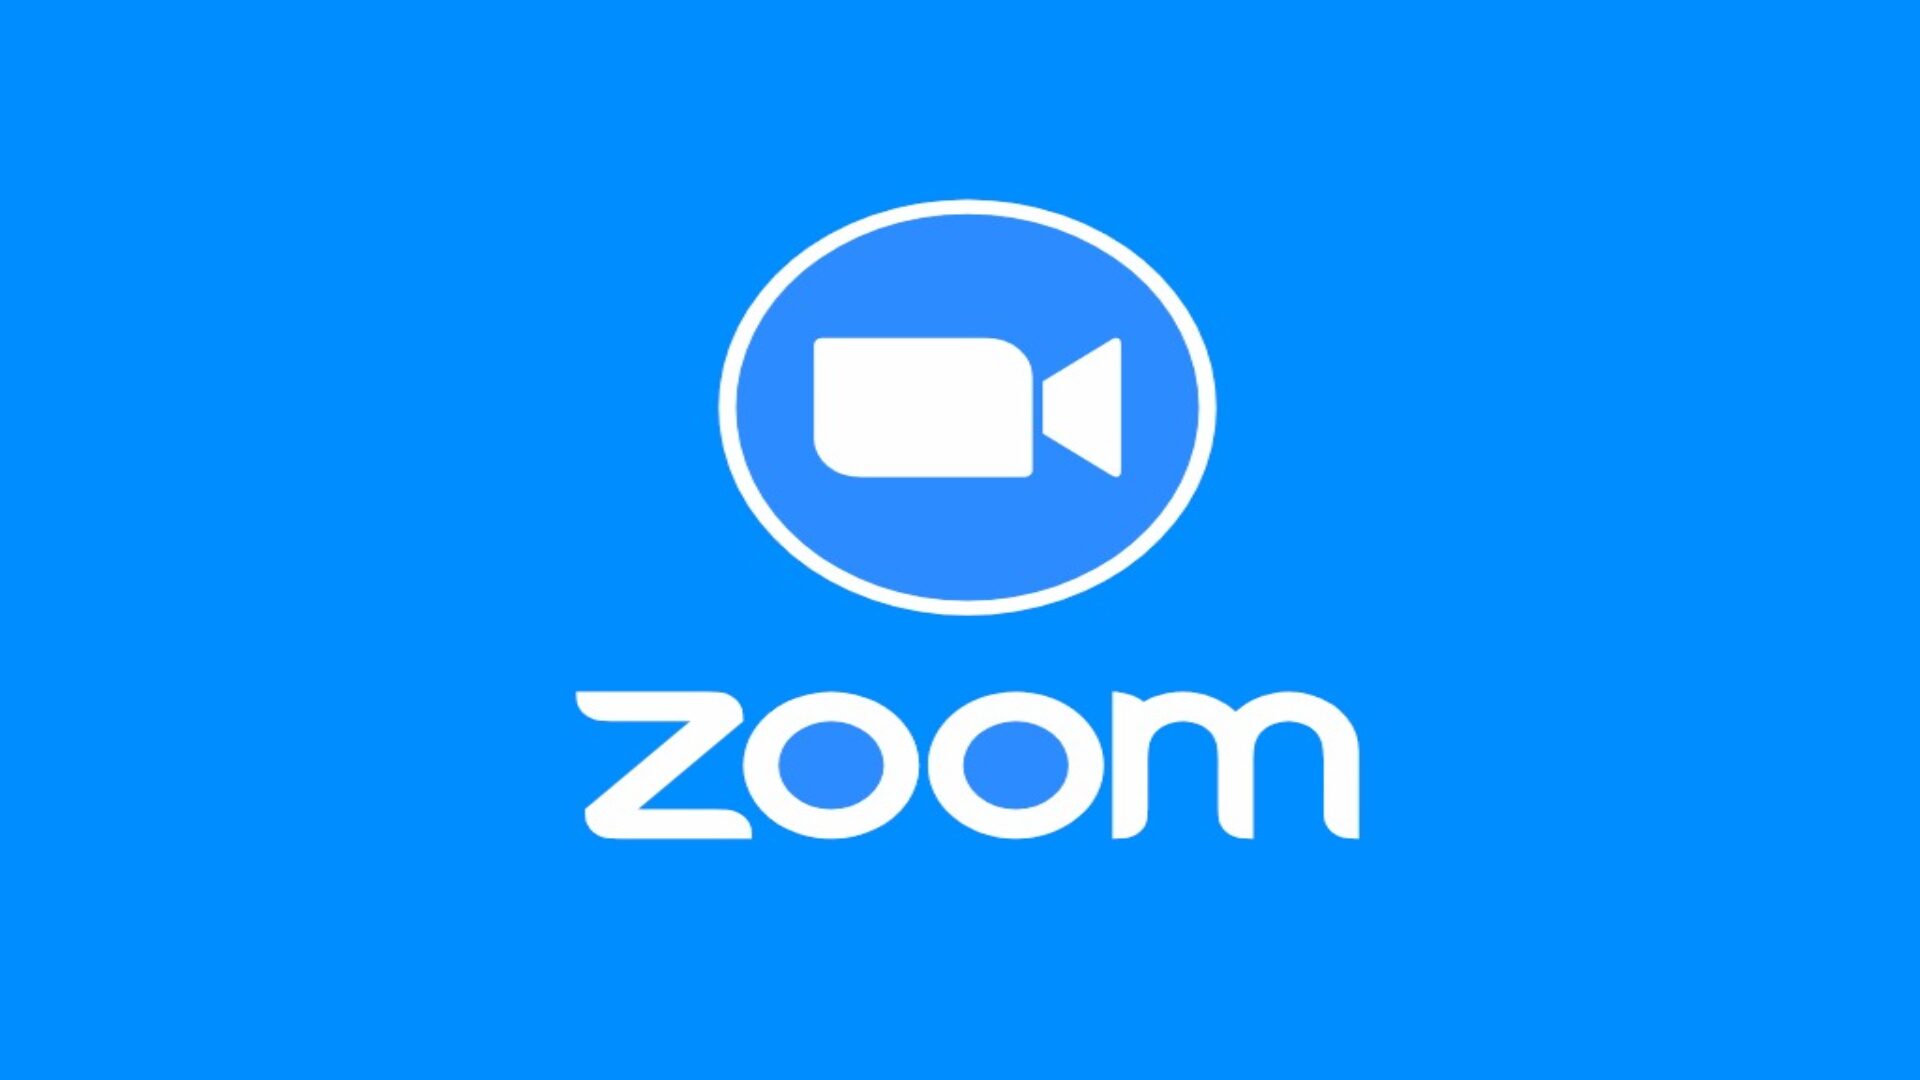 An illustration and icon of zoom meeting